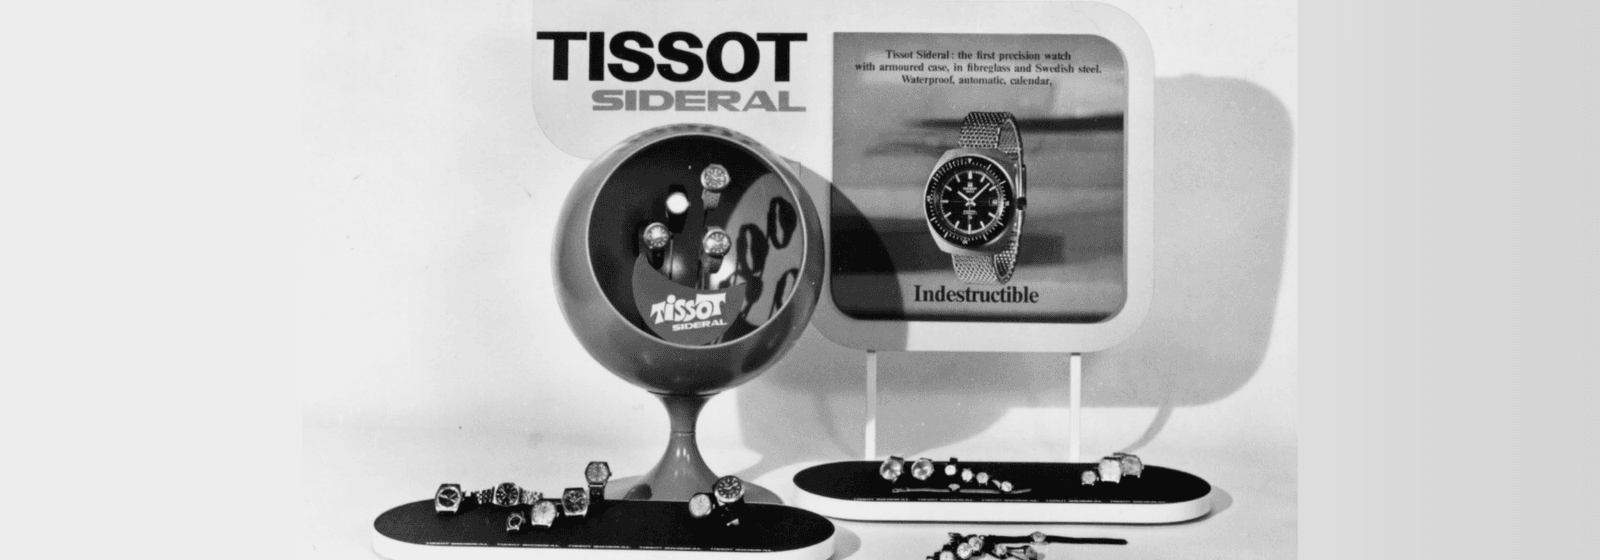 The Curious Case Of The Tissot Sideral: Frozen In A Block Of Ice